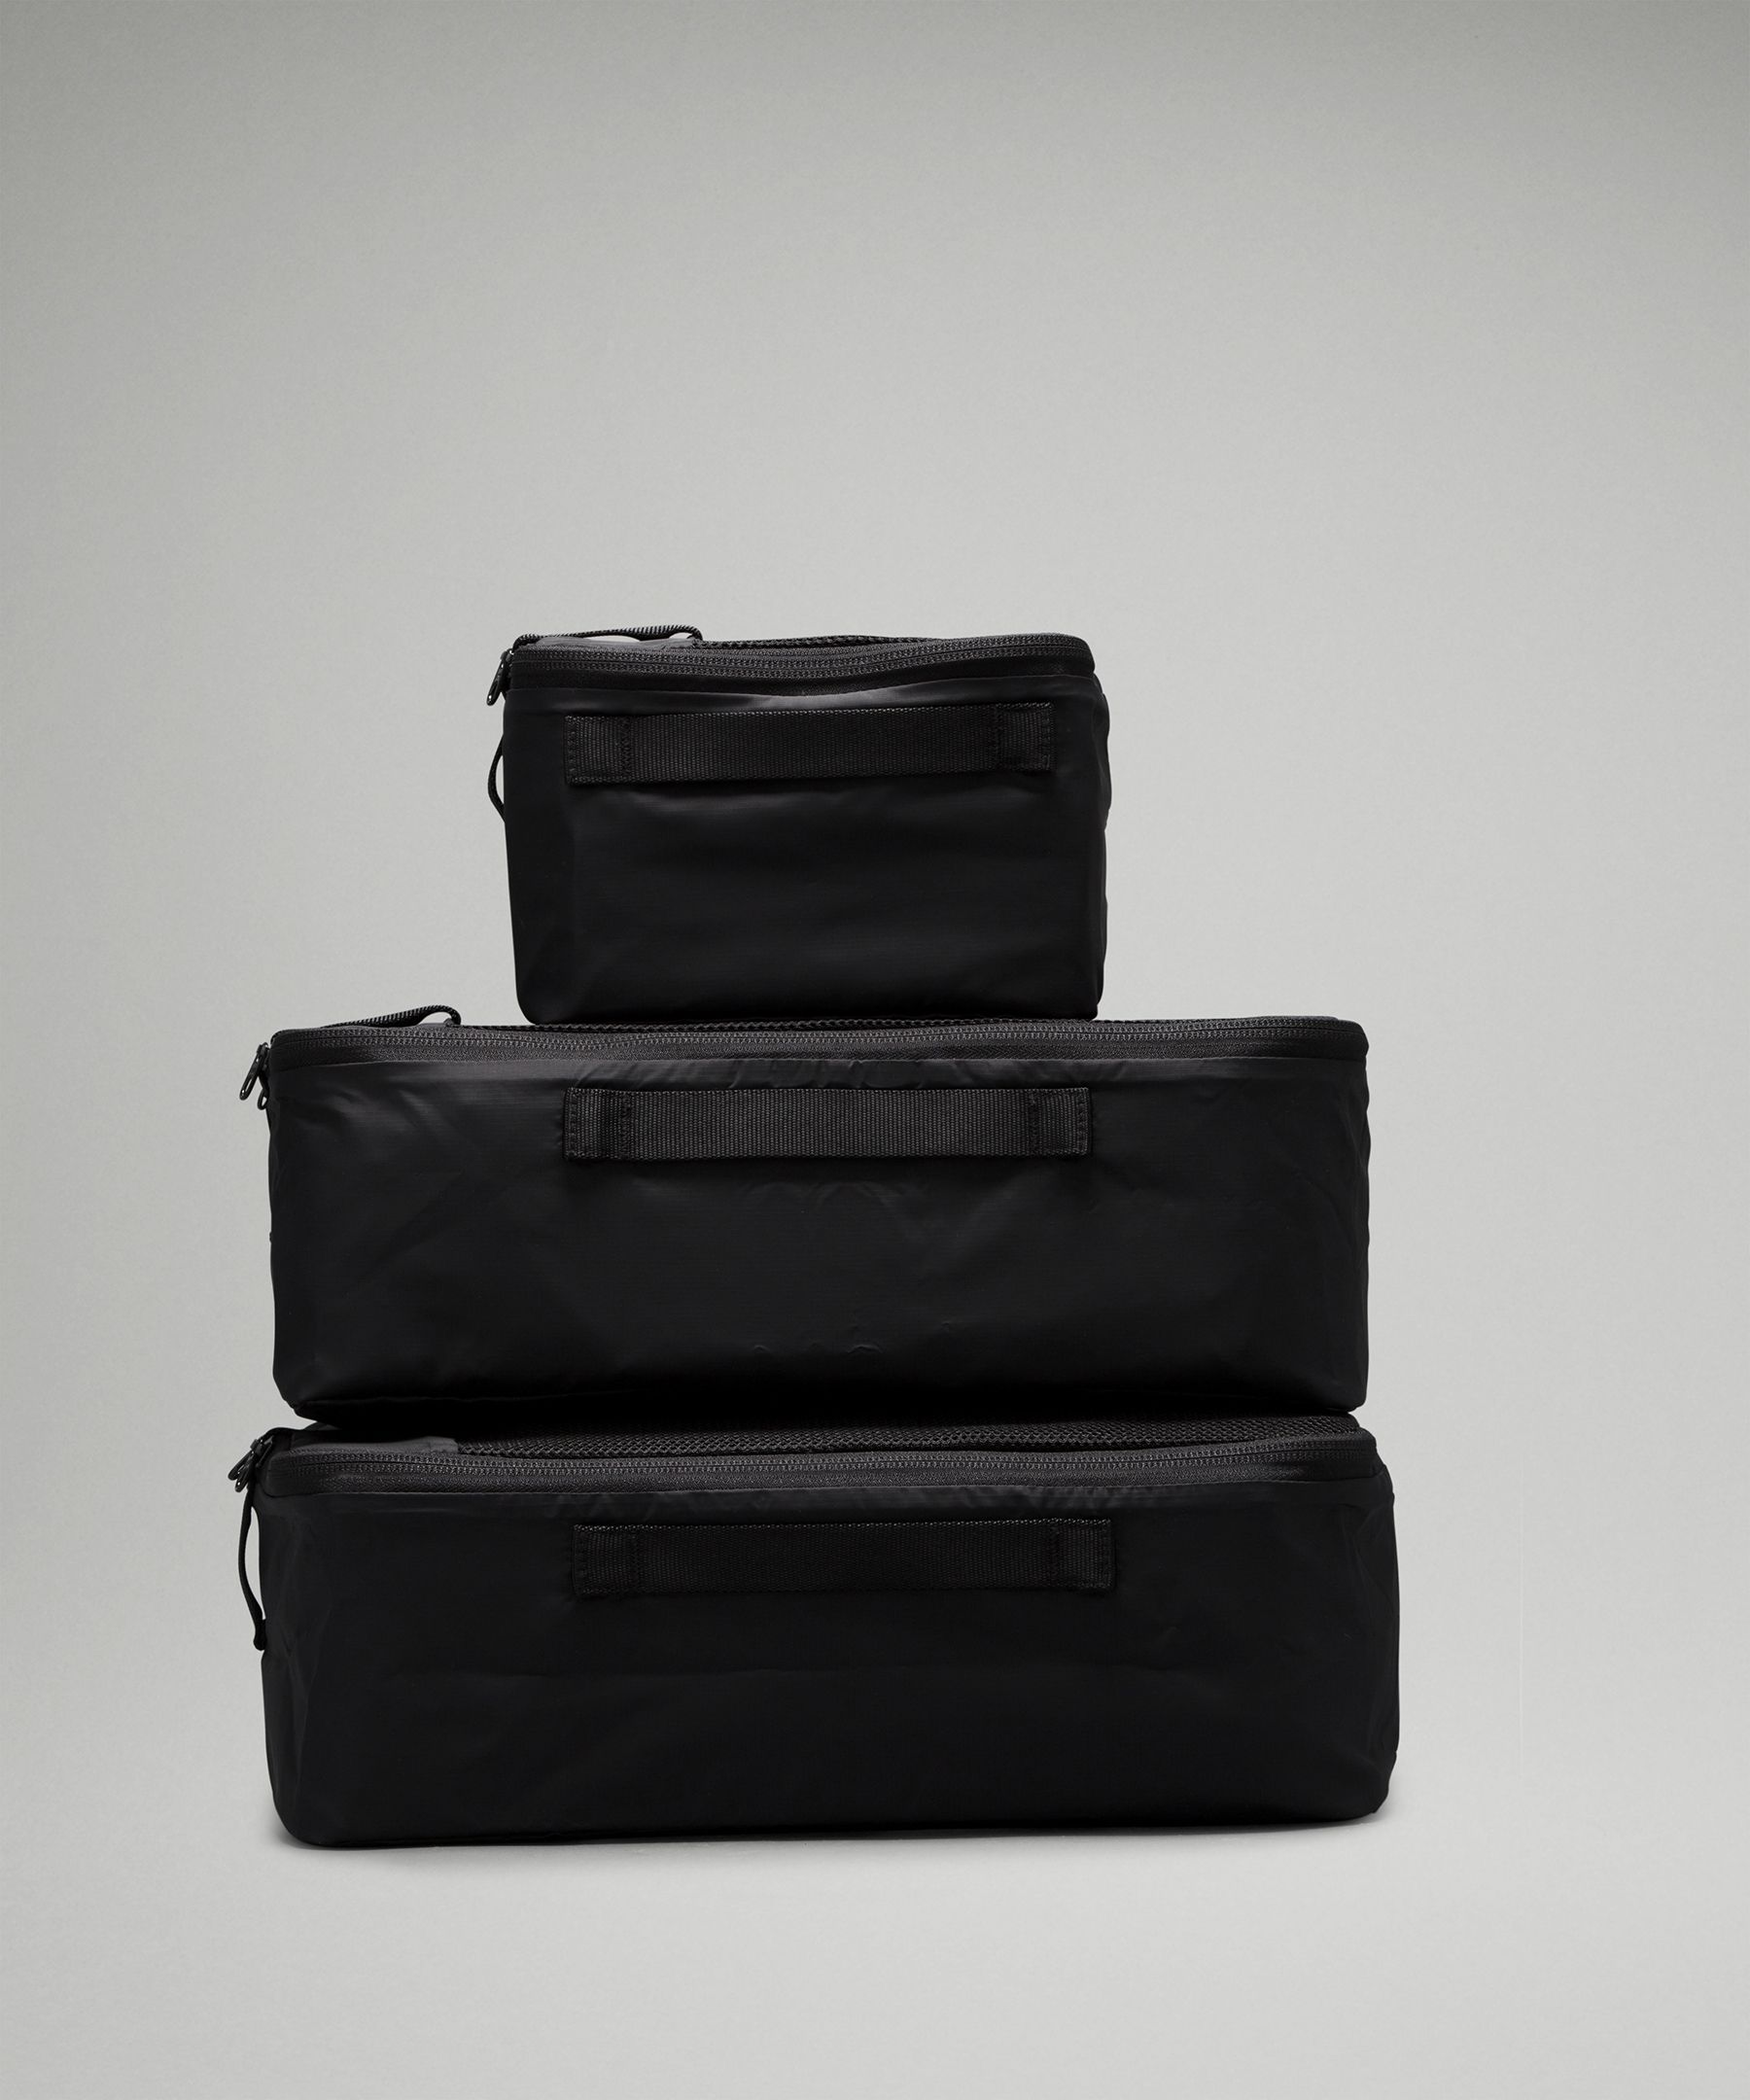 Lululemon Travel Packing Cubes 3 Pack In Brown